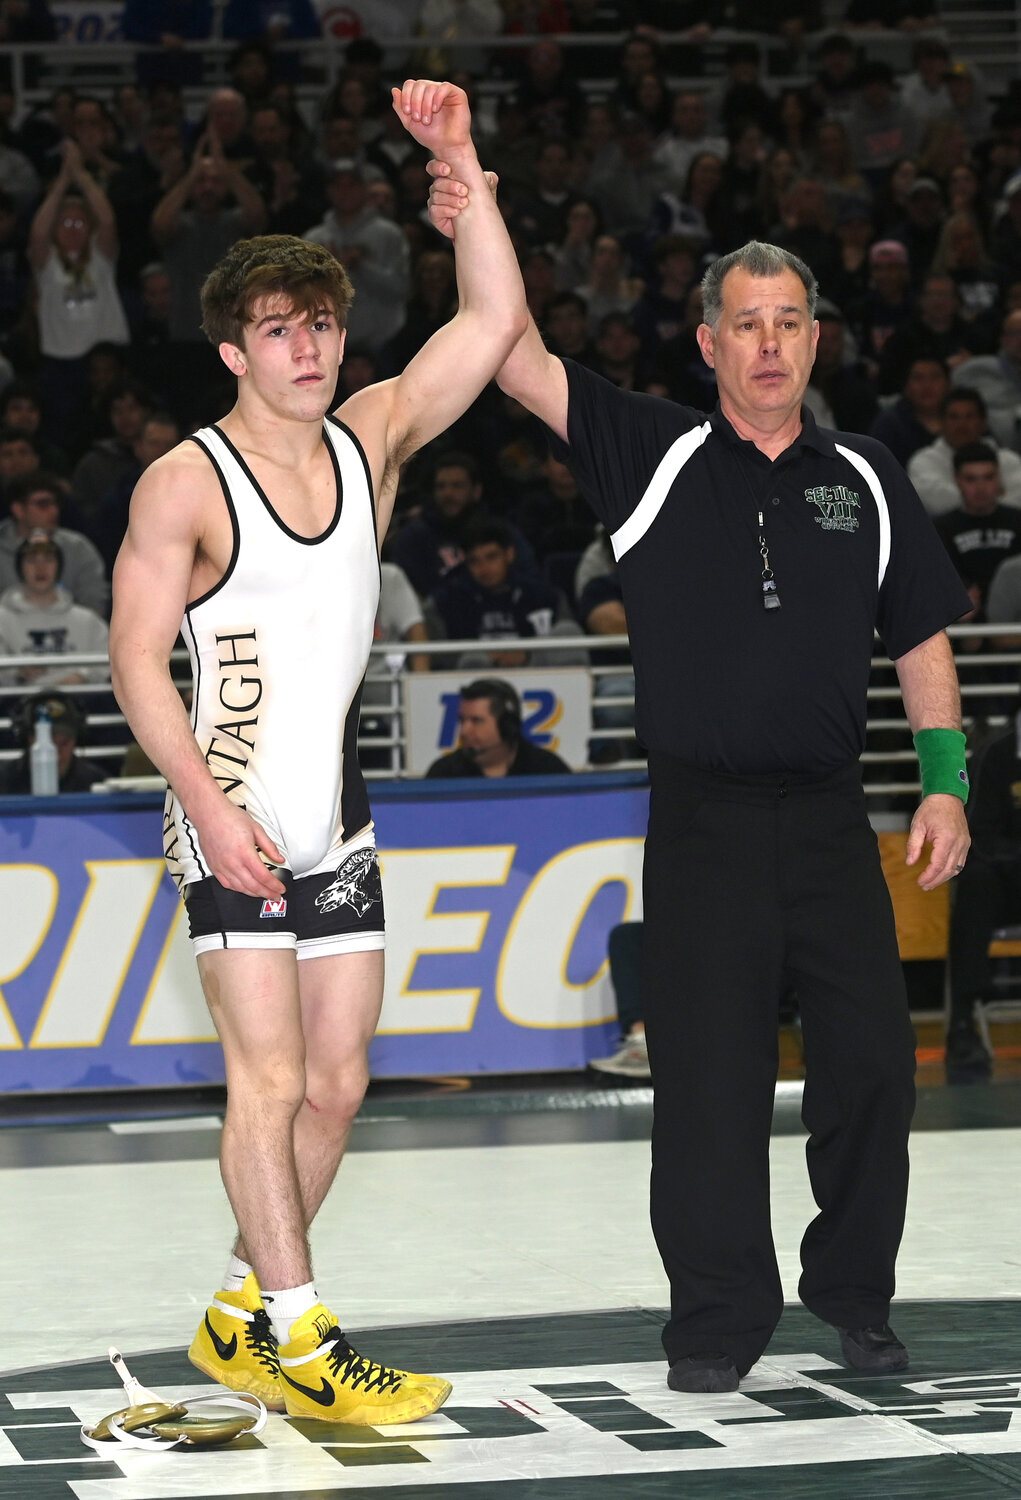 Wantagh's Joseph Clem became a three-time Nassau County wrestling champ Sunday afternoon and seeks a state title.